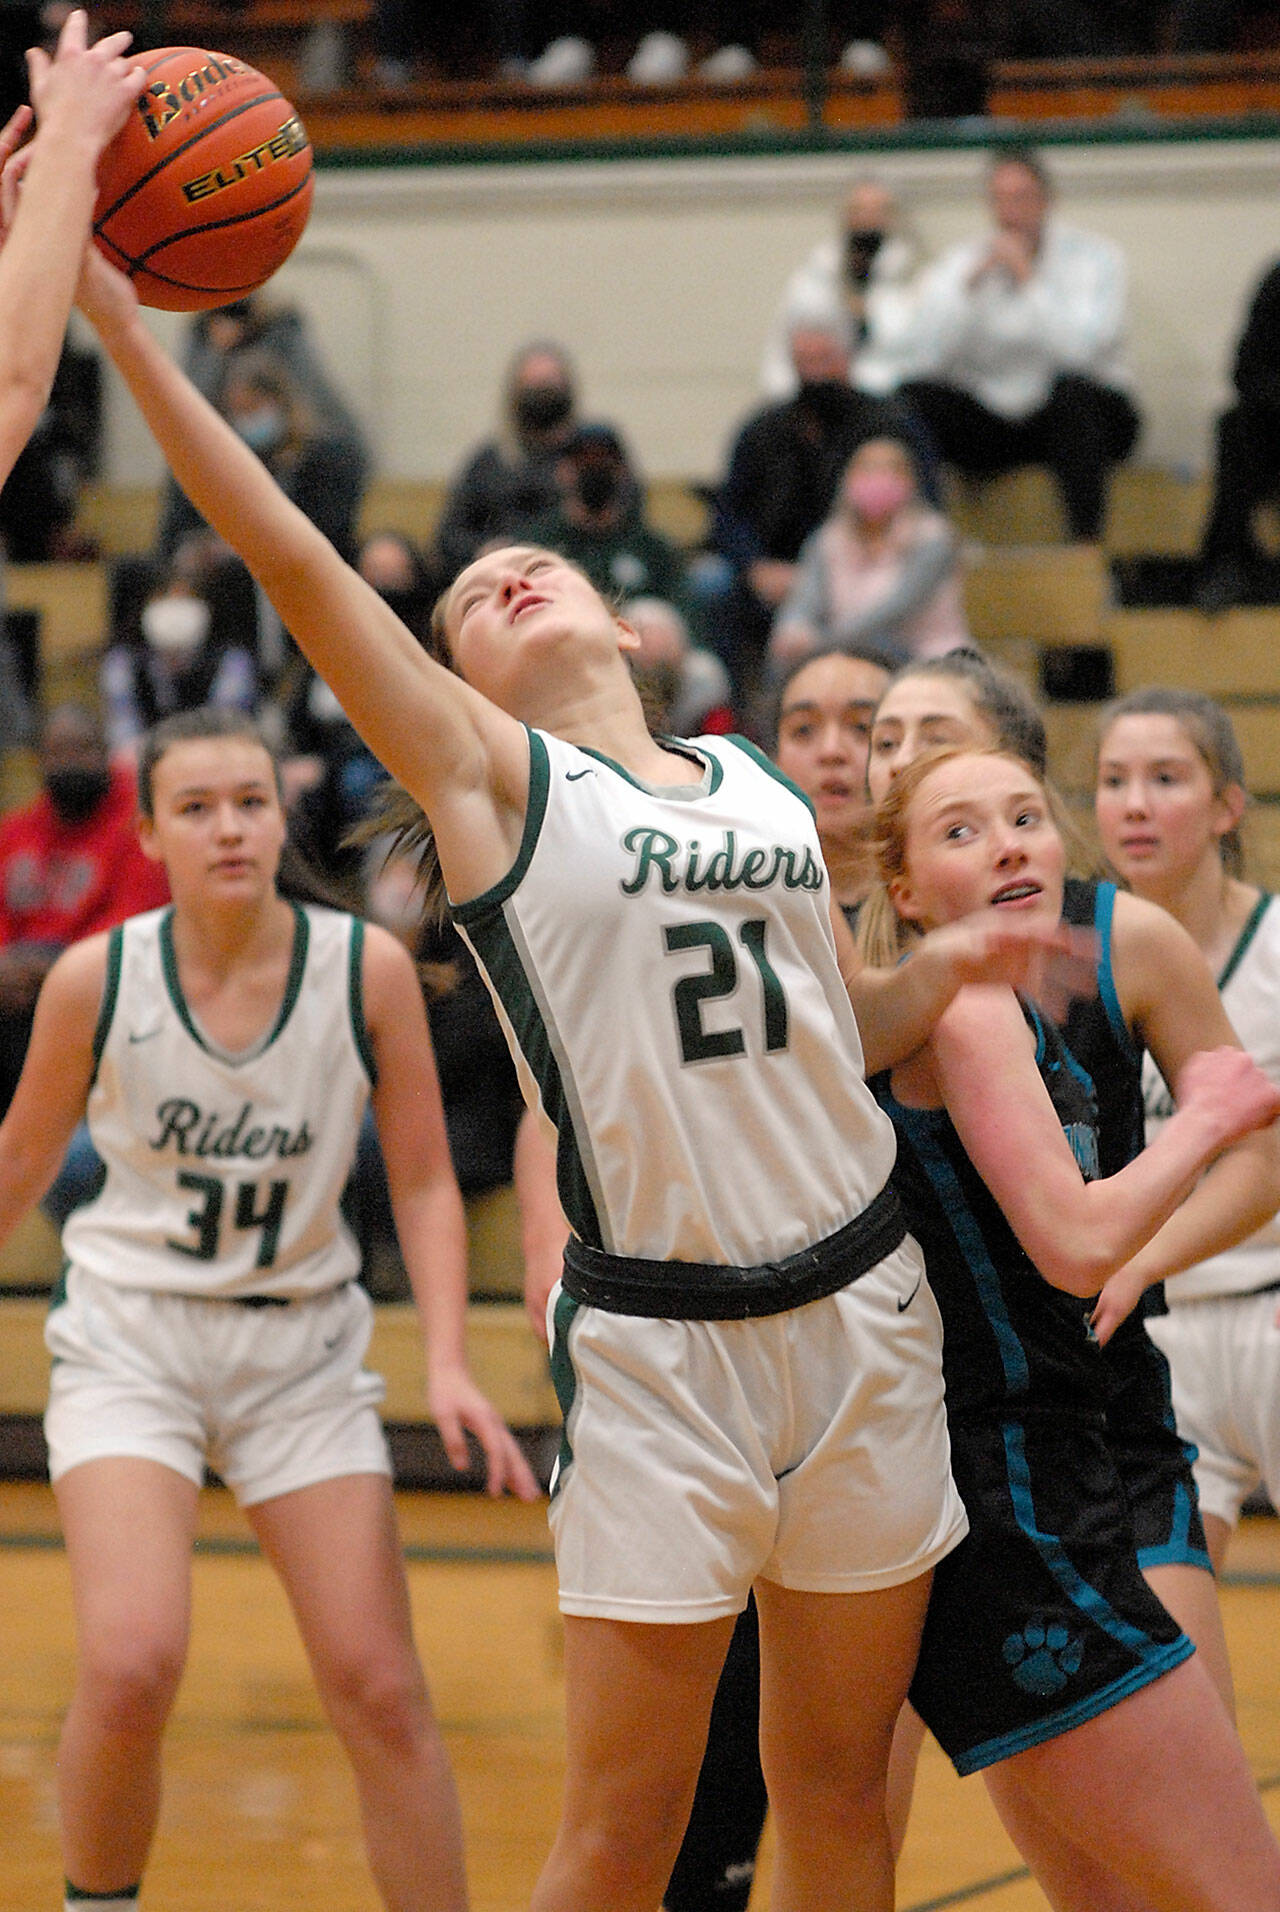 Keith Thorpe/Peninsula Daily News Port Angeles’ Jayde Gedelman, front, battles for a rebound as teammate Lexie Smith, left, and the Bonney Lake defense look on during Saturday’s game at Port Angeles High School.